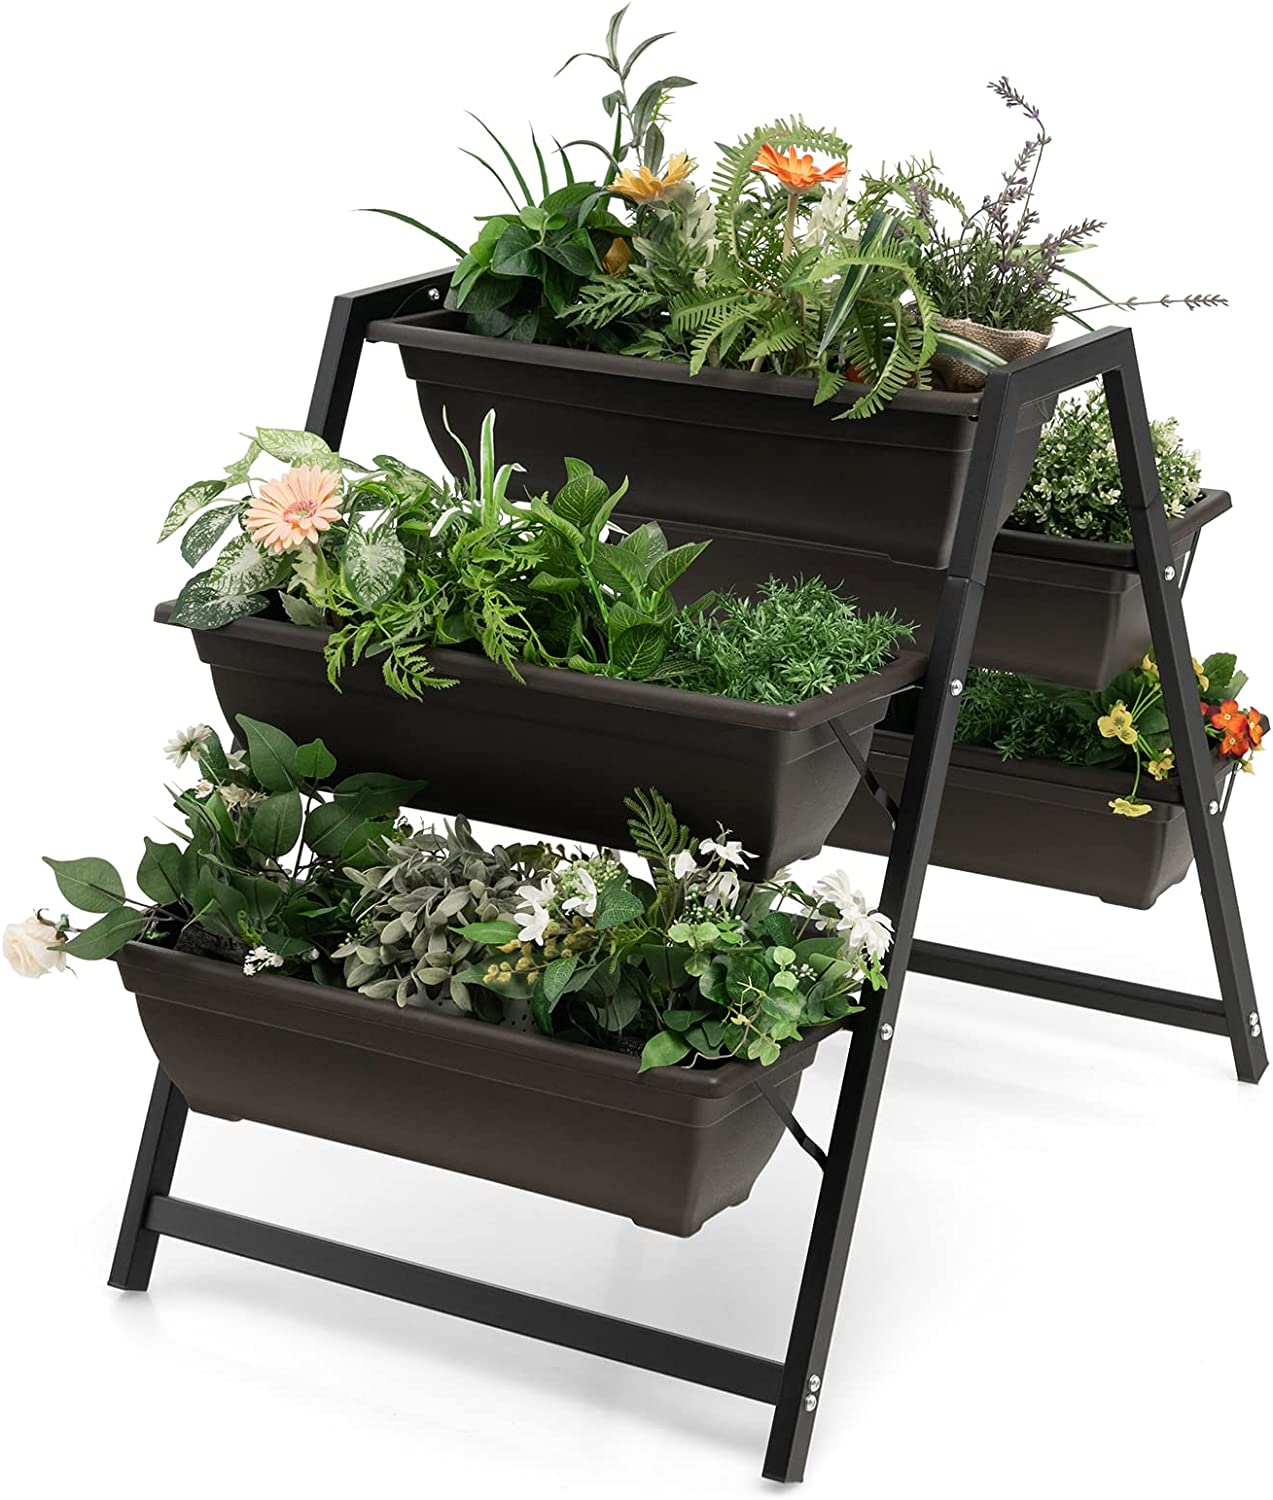 Giantex Set of 2 Vertical Raised Garden Bed, 5 Planter Boxes Container w/ Drainage Holes